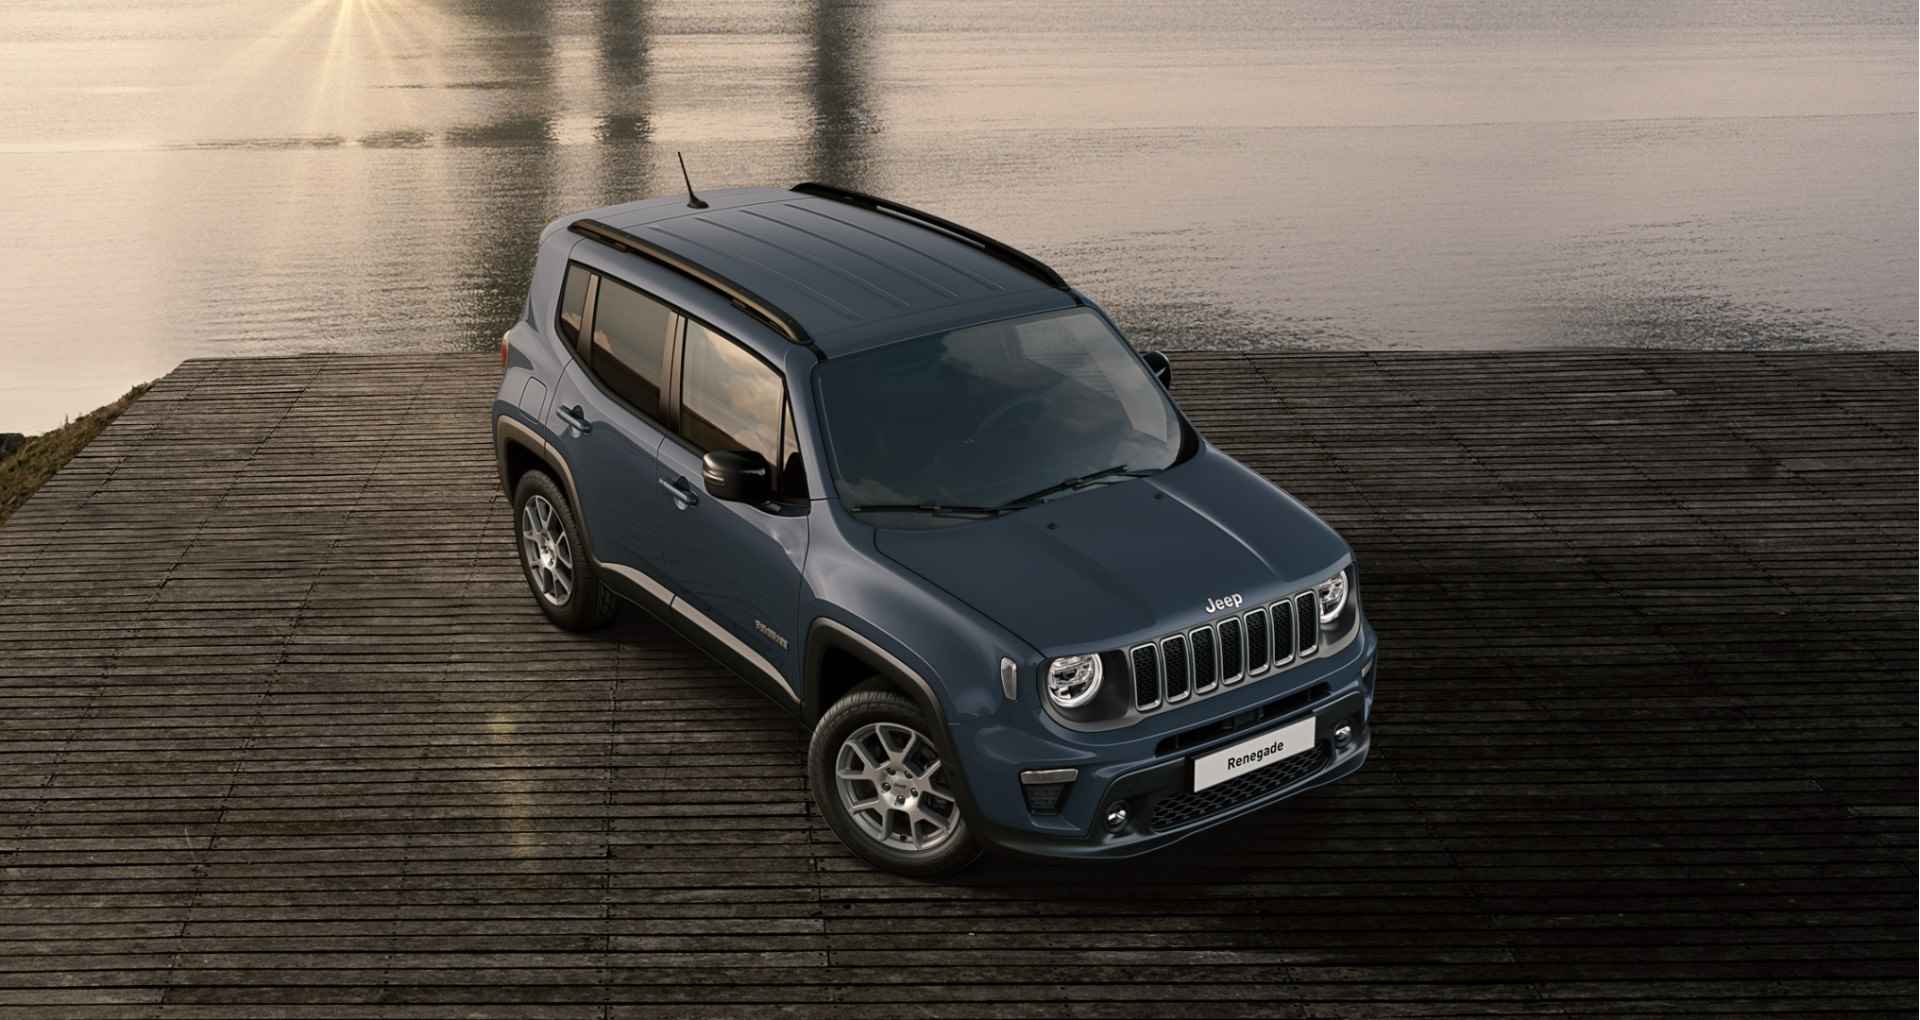 Jeep Renegade 1.5T 130 pk Automaat e-Hybrid Limited | Registratiekorting  €5.143 | Convenience Pack | Style Pack |  Visibility Pack | Uconnect™ LIVE-infotainmentsysteem met 8,4-inch Touchscreen, Navigatie en Bluetooth - 5/9